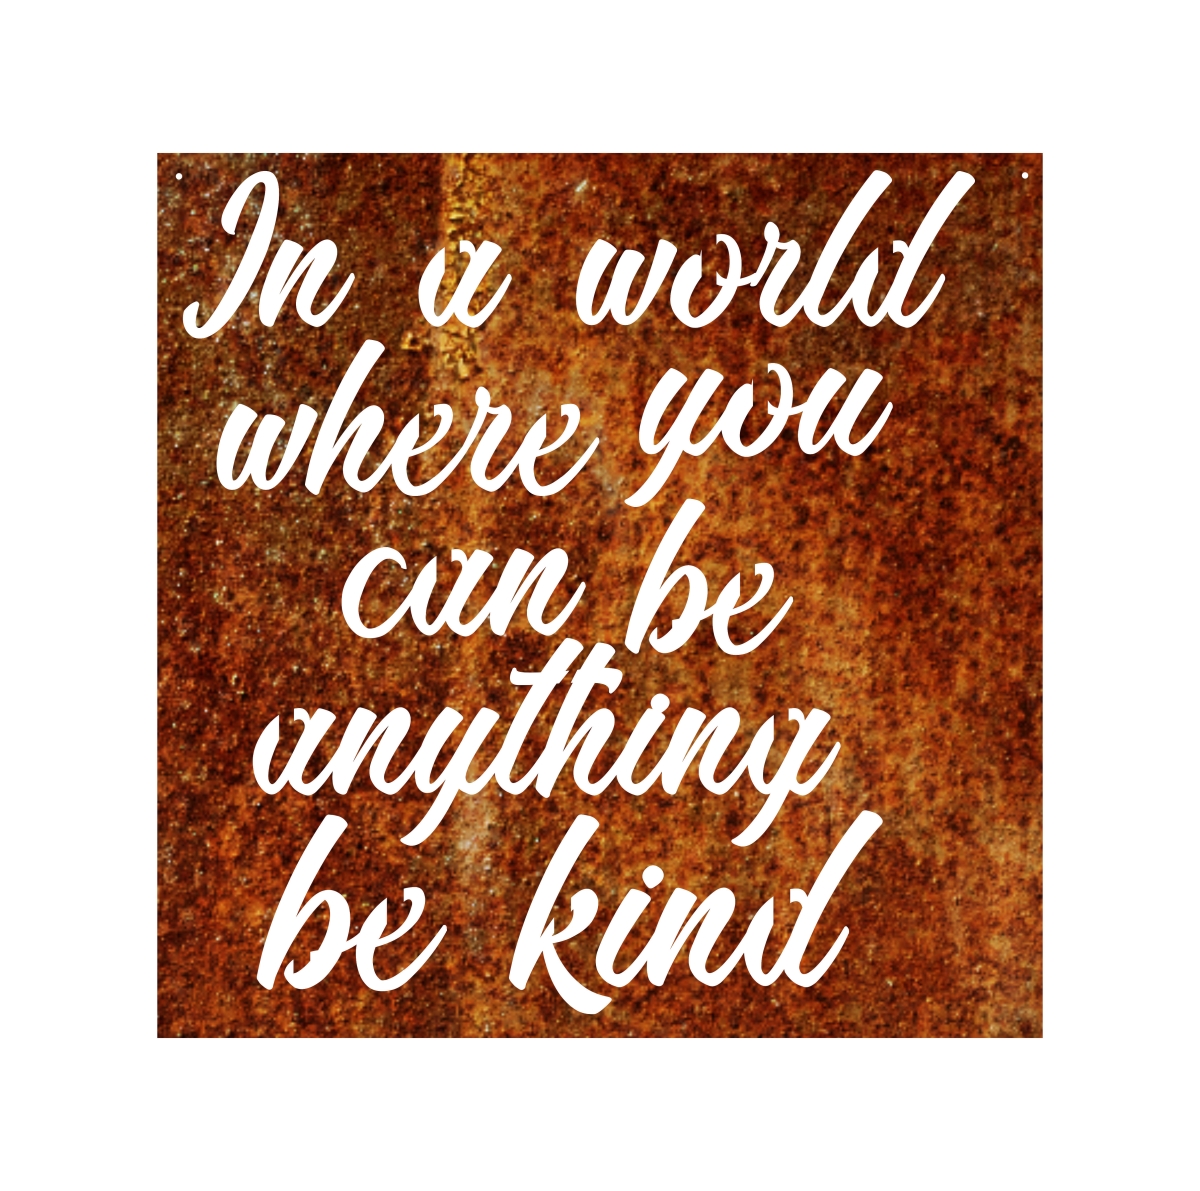 18 In. Faith Be Kind Square Steel Laser Cut Wall Art With Script Cut-out Of In A World Where You Can Be Anything, Be Kind In Natural Patina